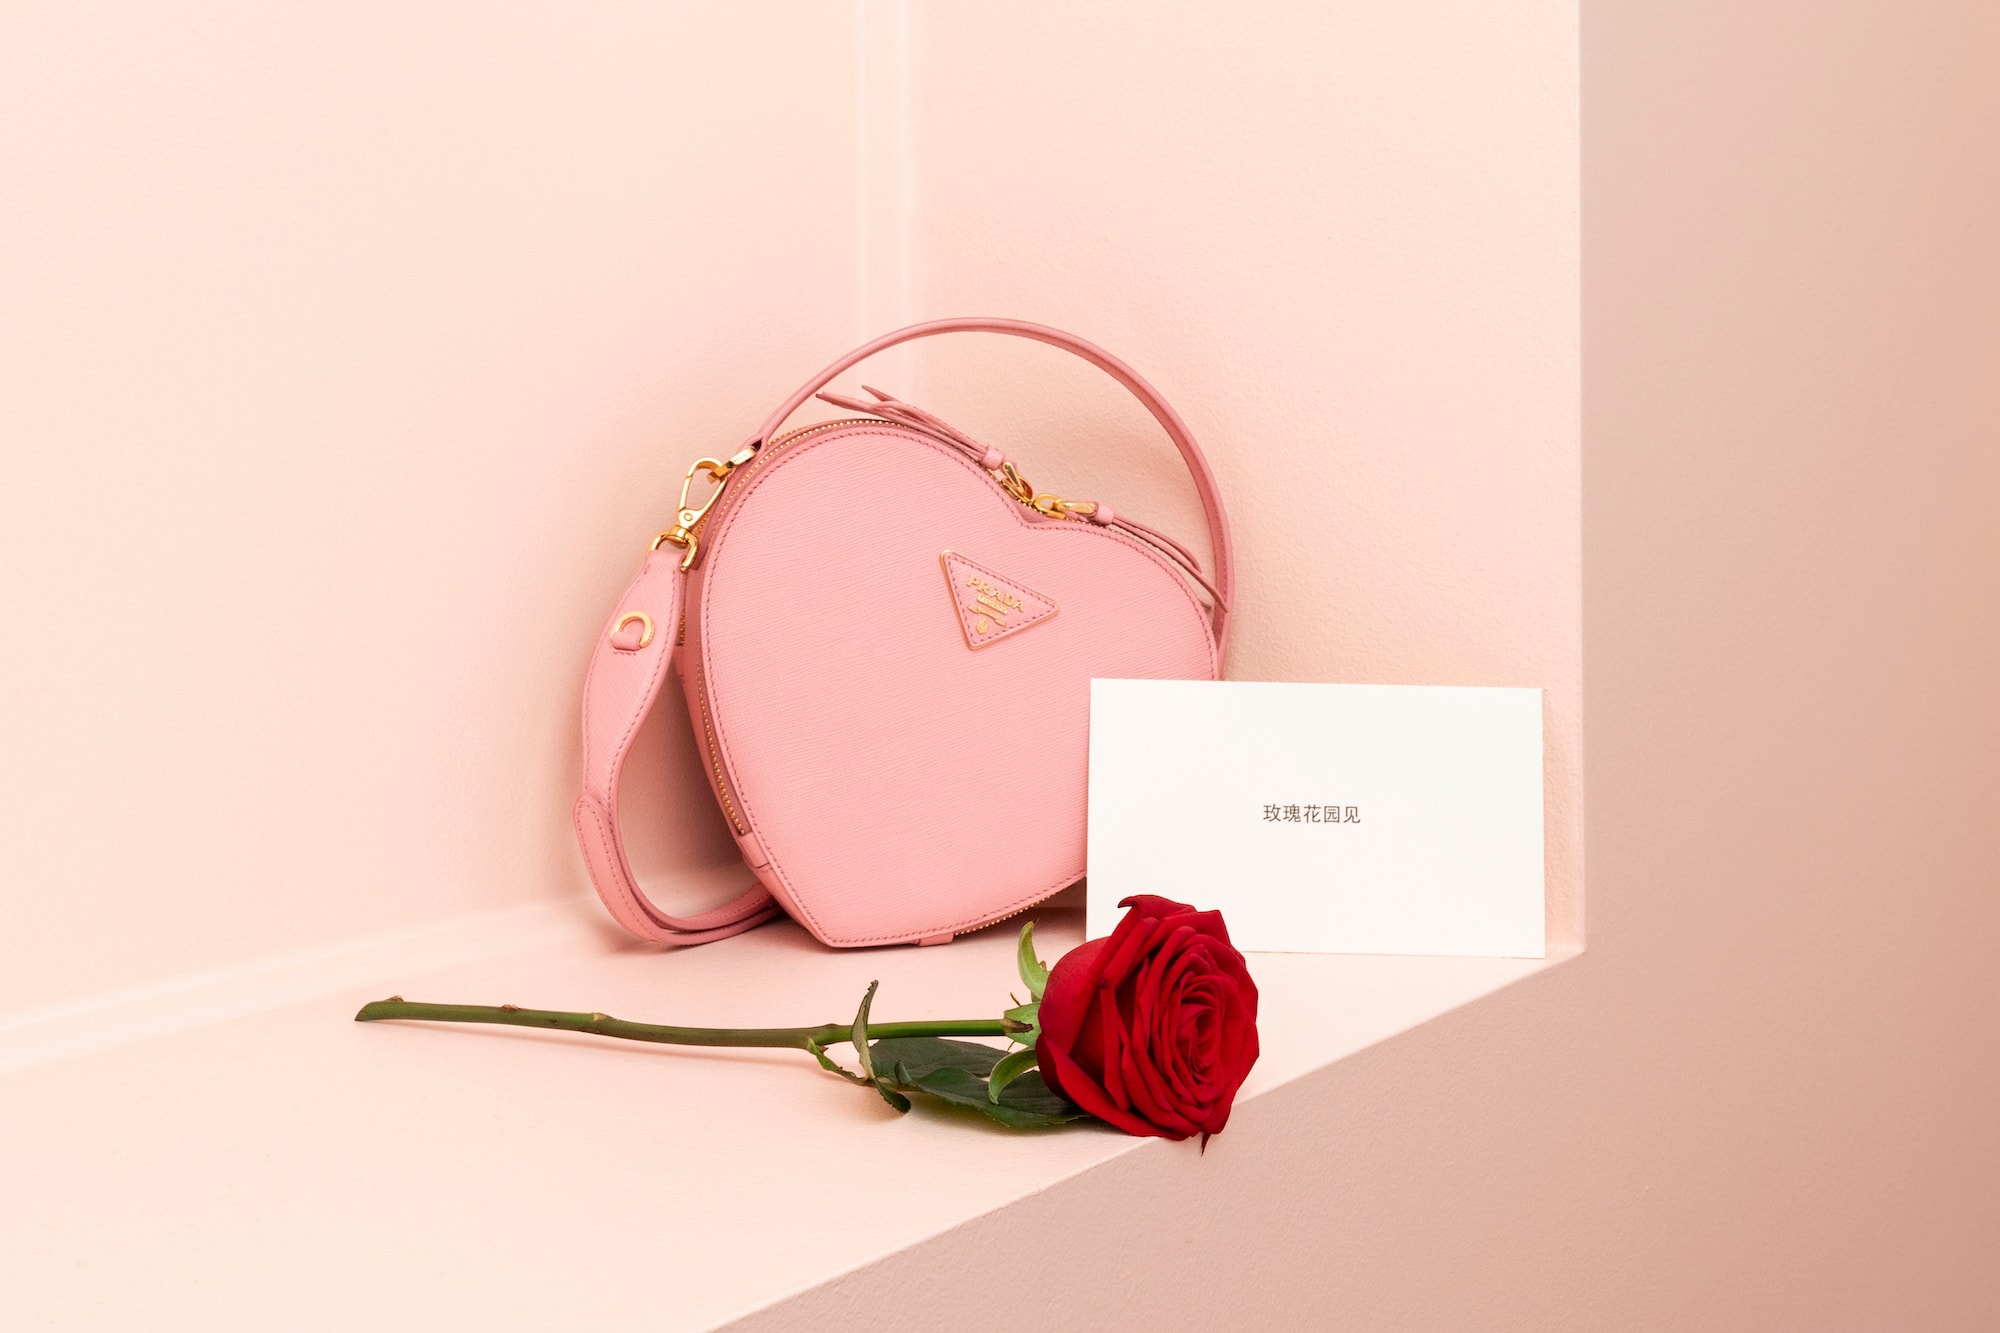 Prada Love Heart Bag and Accessories Collection Pink Red Qixi Festival Celebration Capsule 